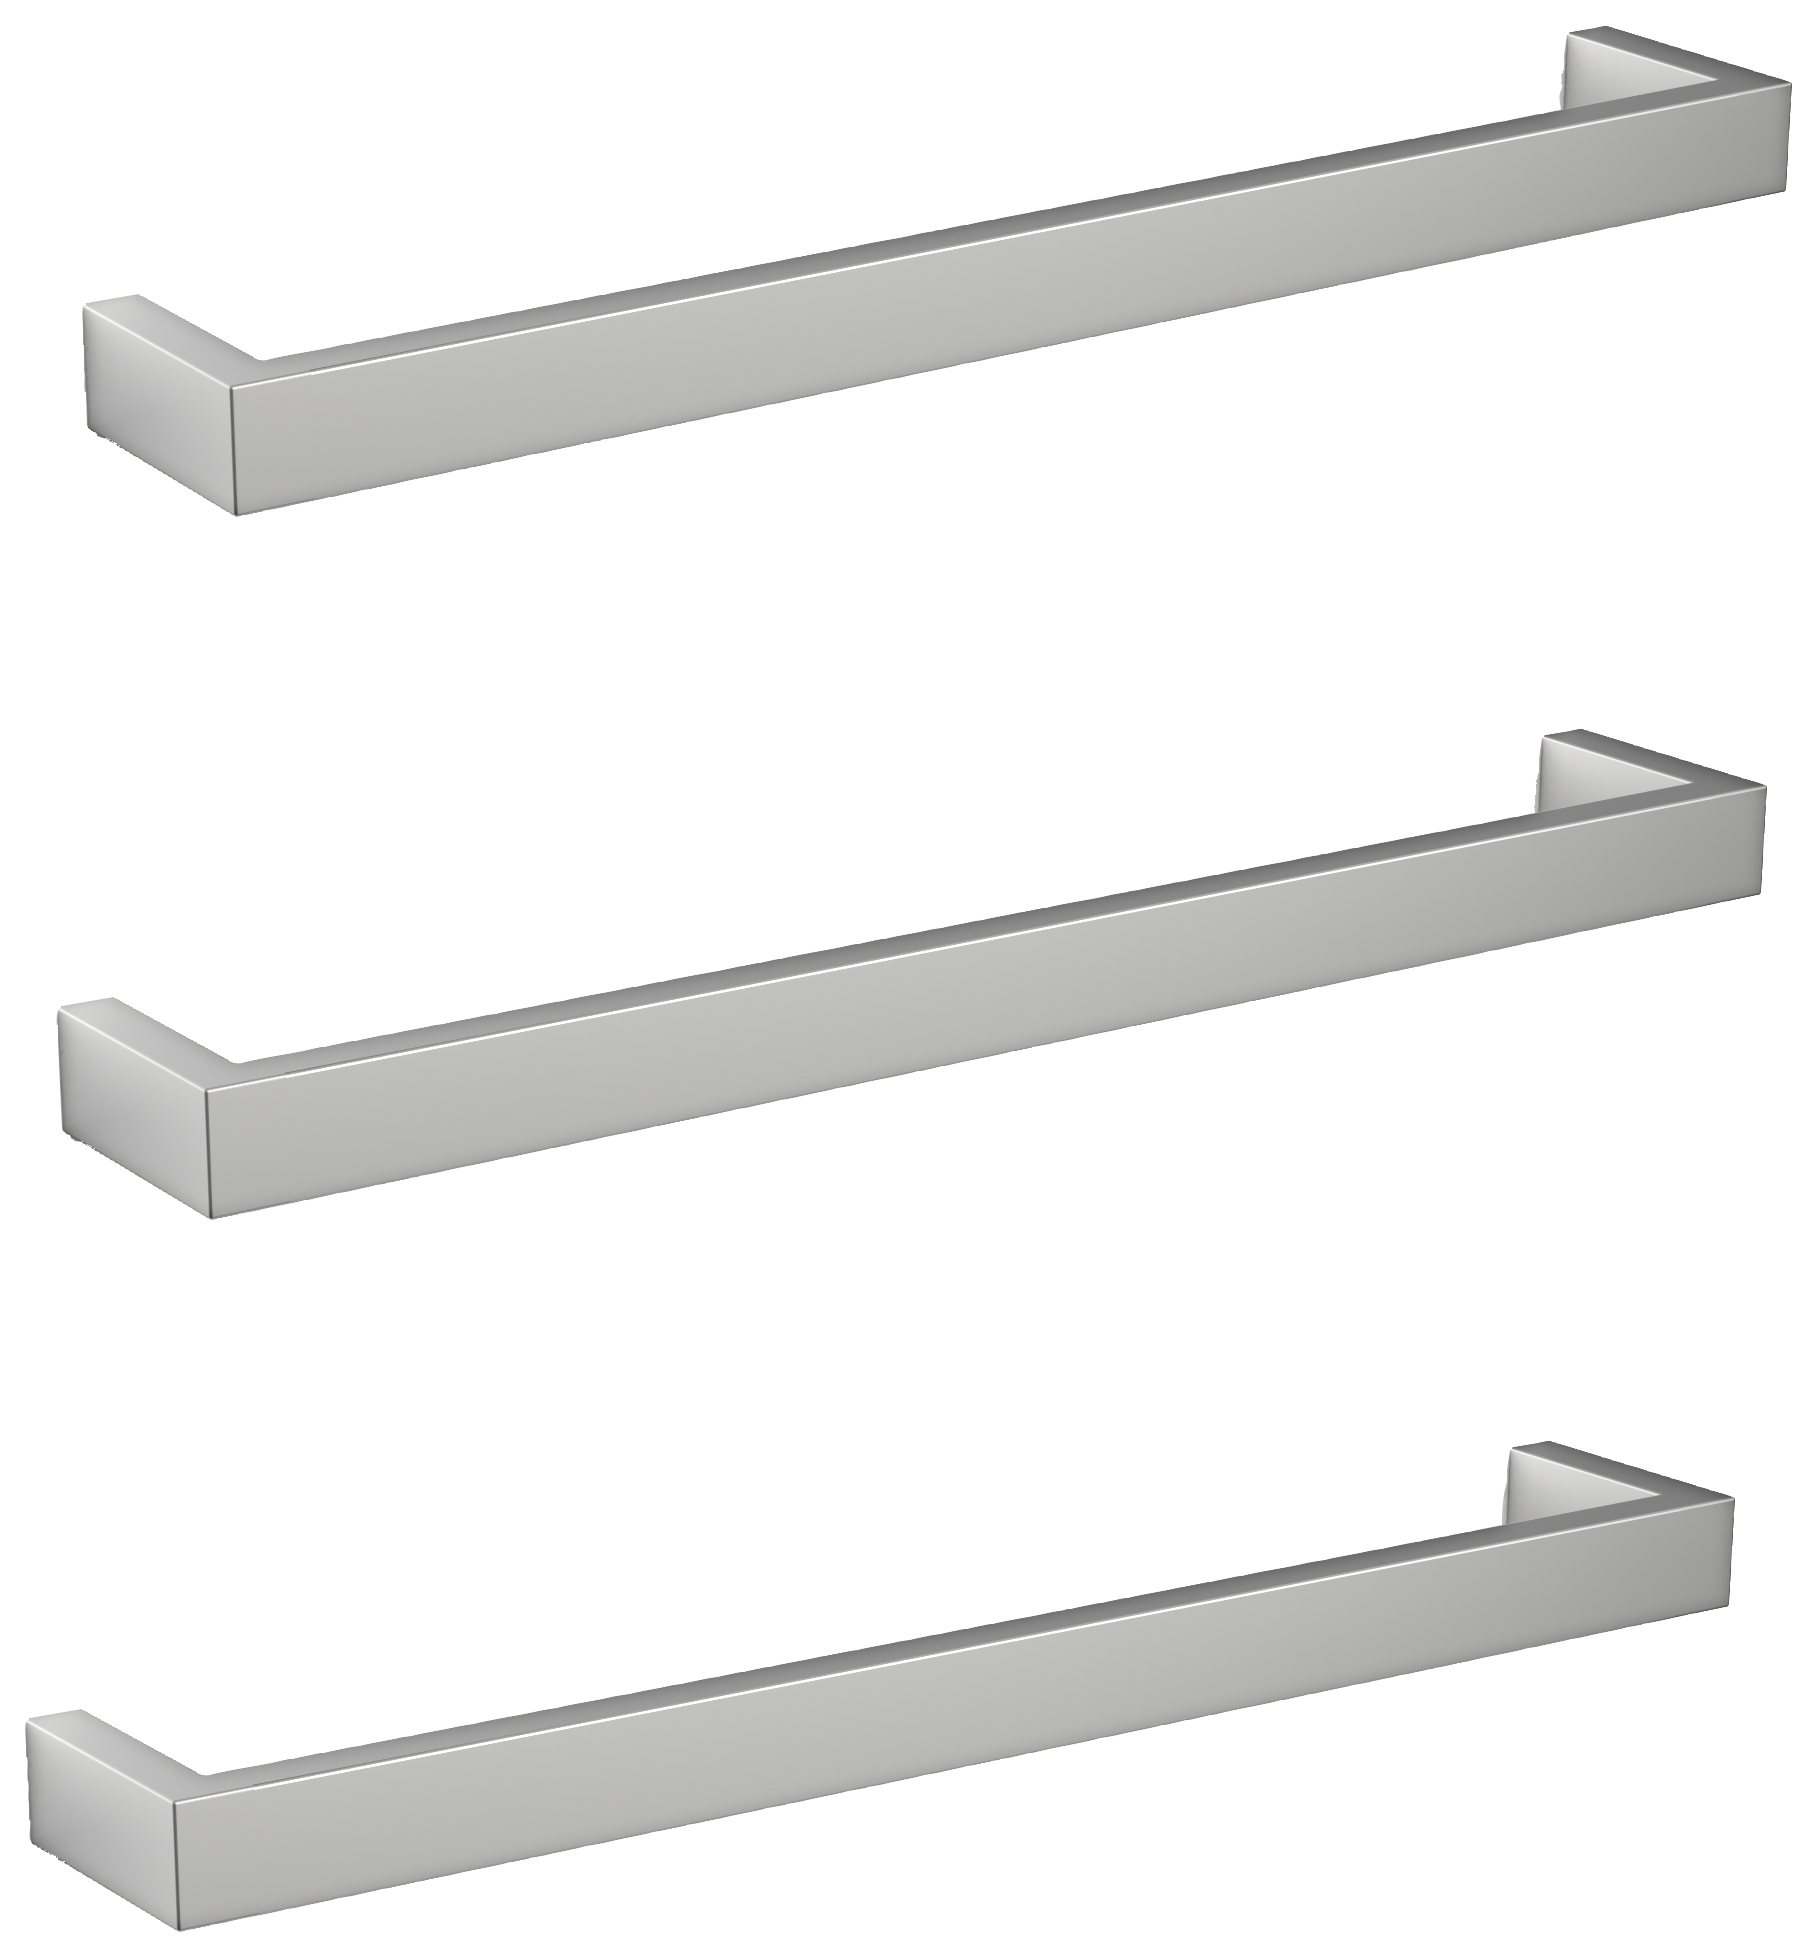 Towelrads Elcot Brushed Stainless Dry Electric Towel Bars - 630mm